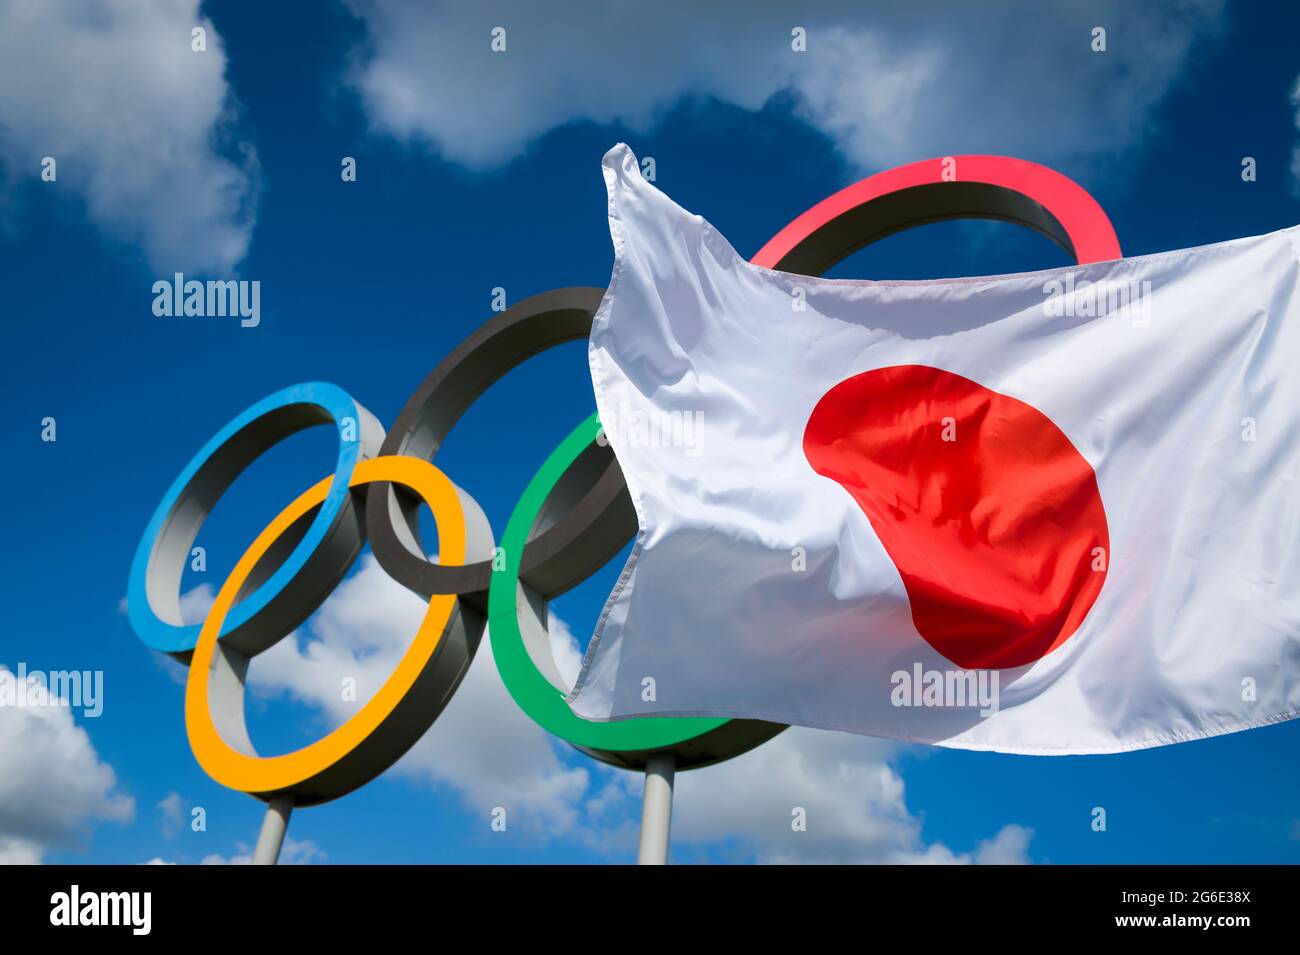 RIO DE JANEIRO - MARCH, 2016: A Japanese flag flutters in the wind in front of Olympic Rings standing under bright blue sky. Stock Photo